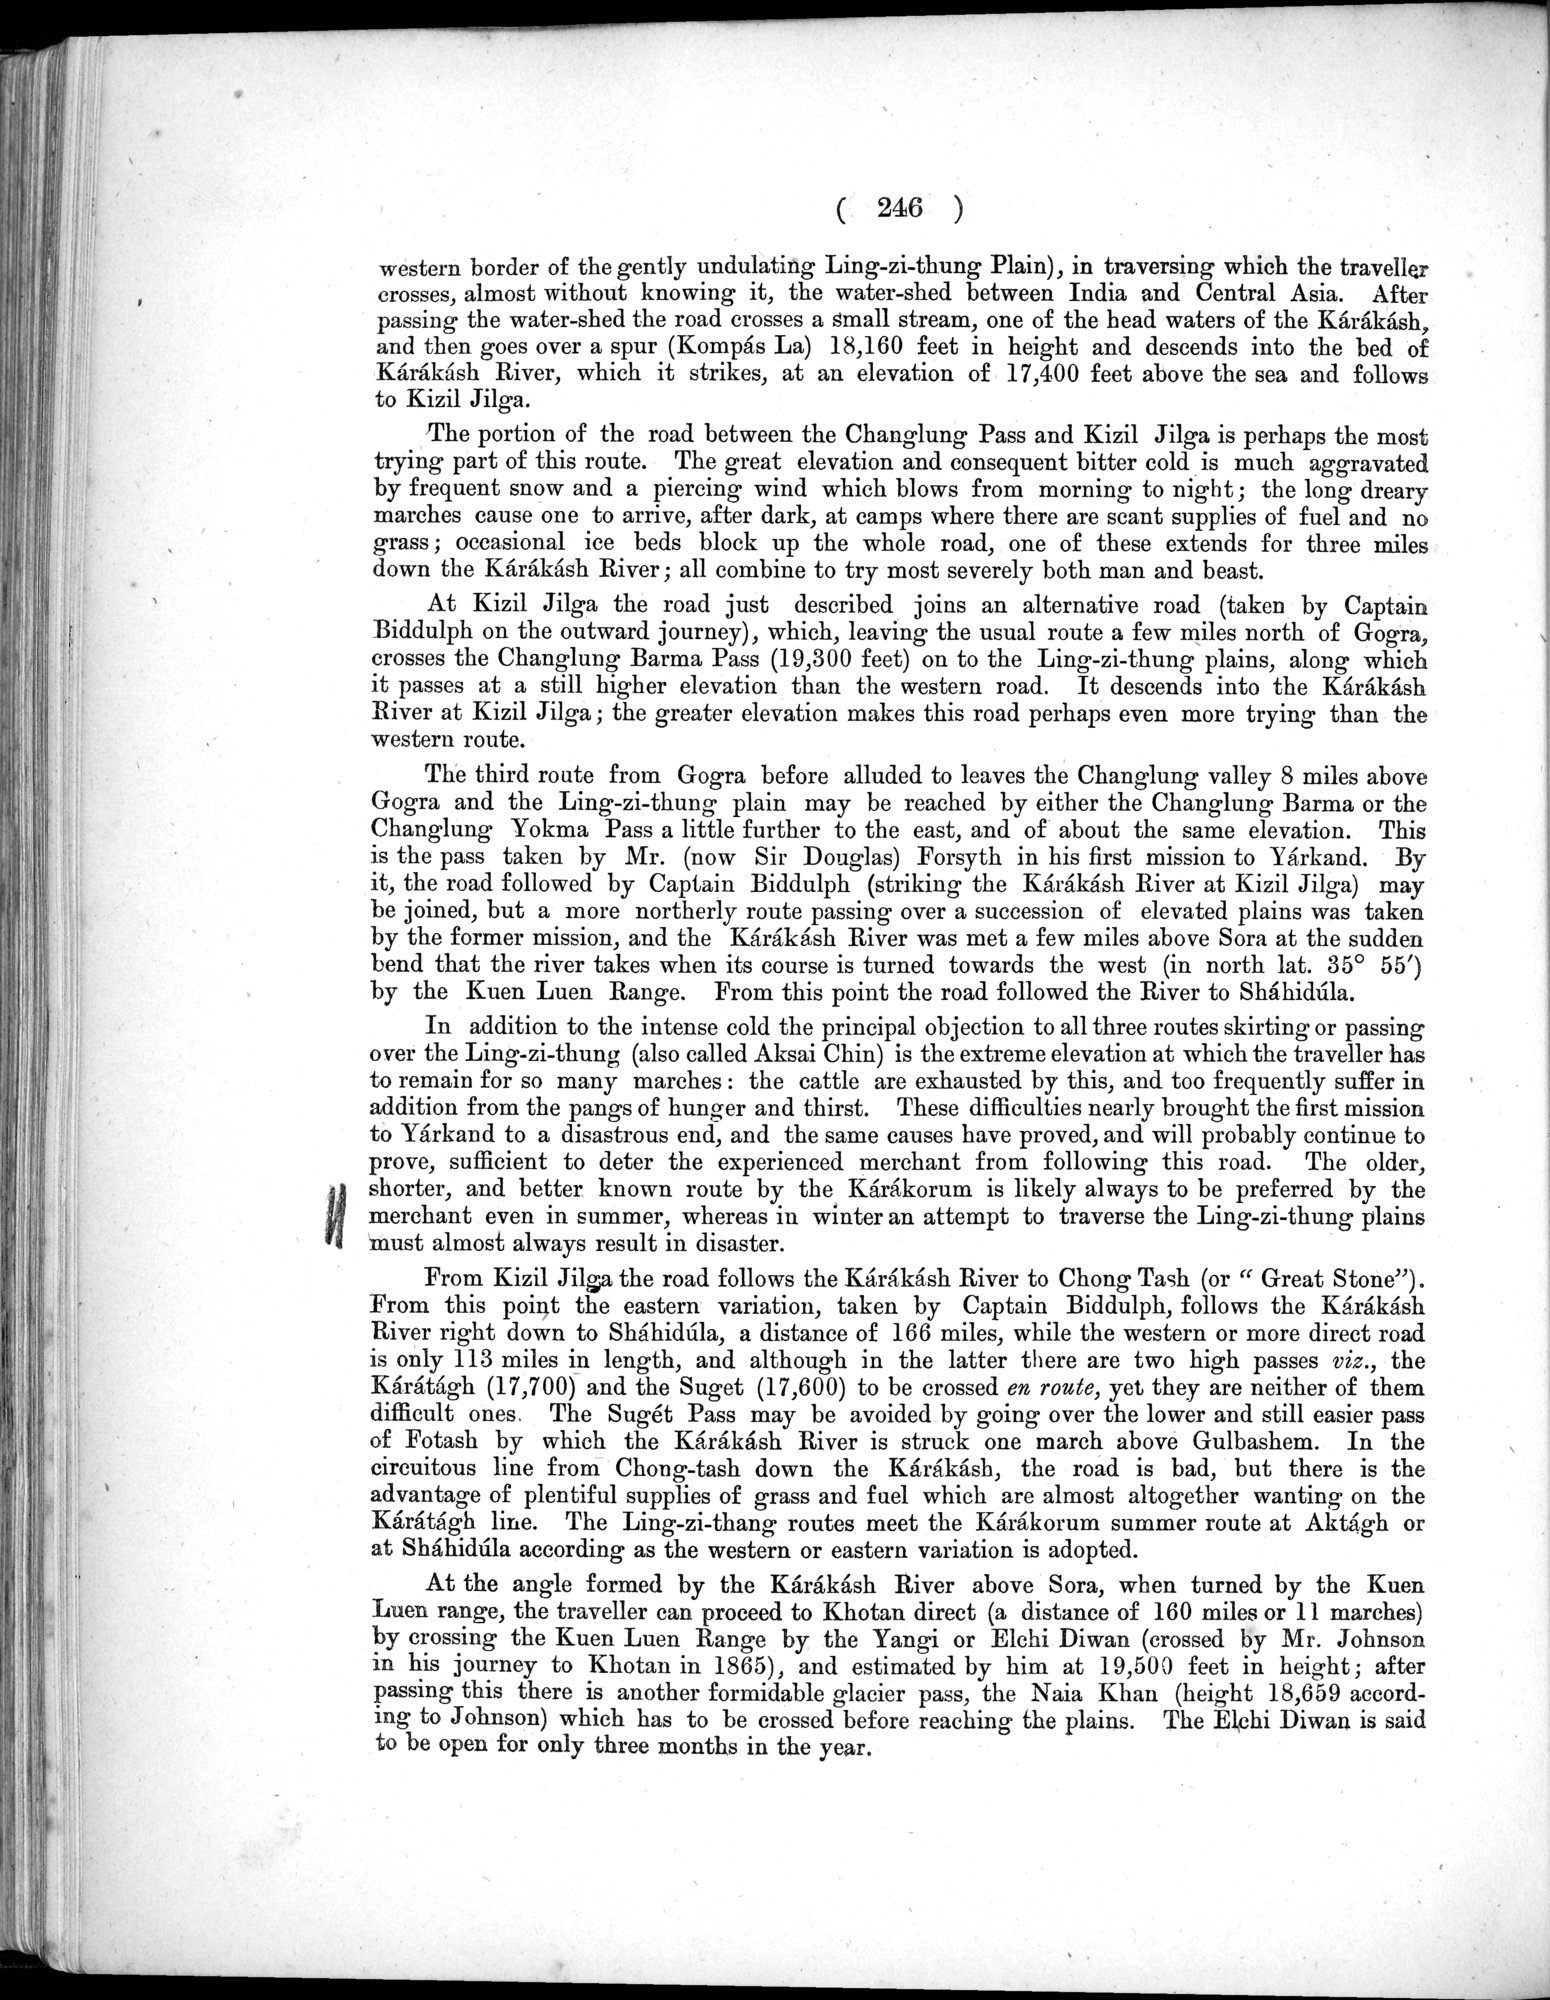 Report of a Mission to Yarkund in 1873 : vol.1 / Page 352 (Grayscale High Resolution Image)